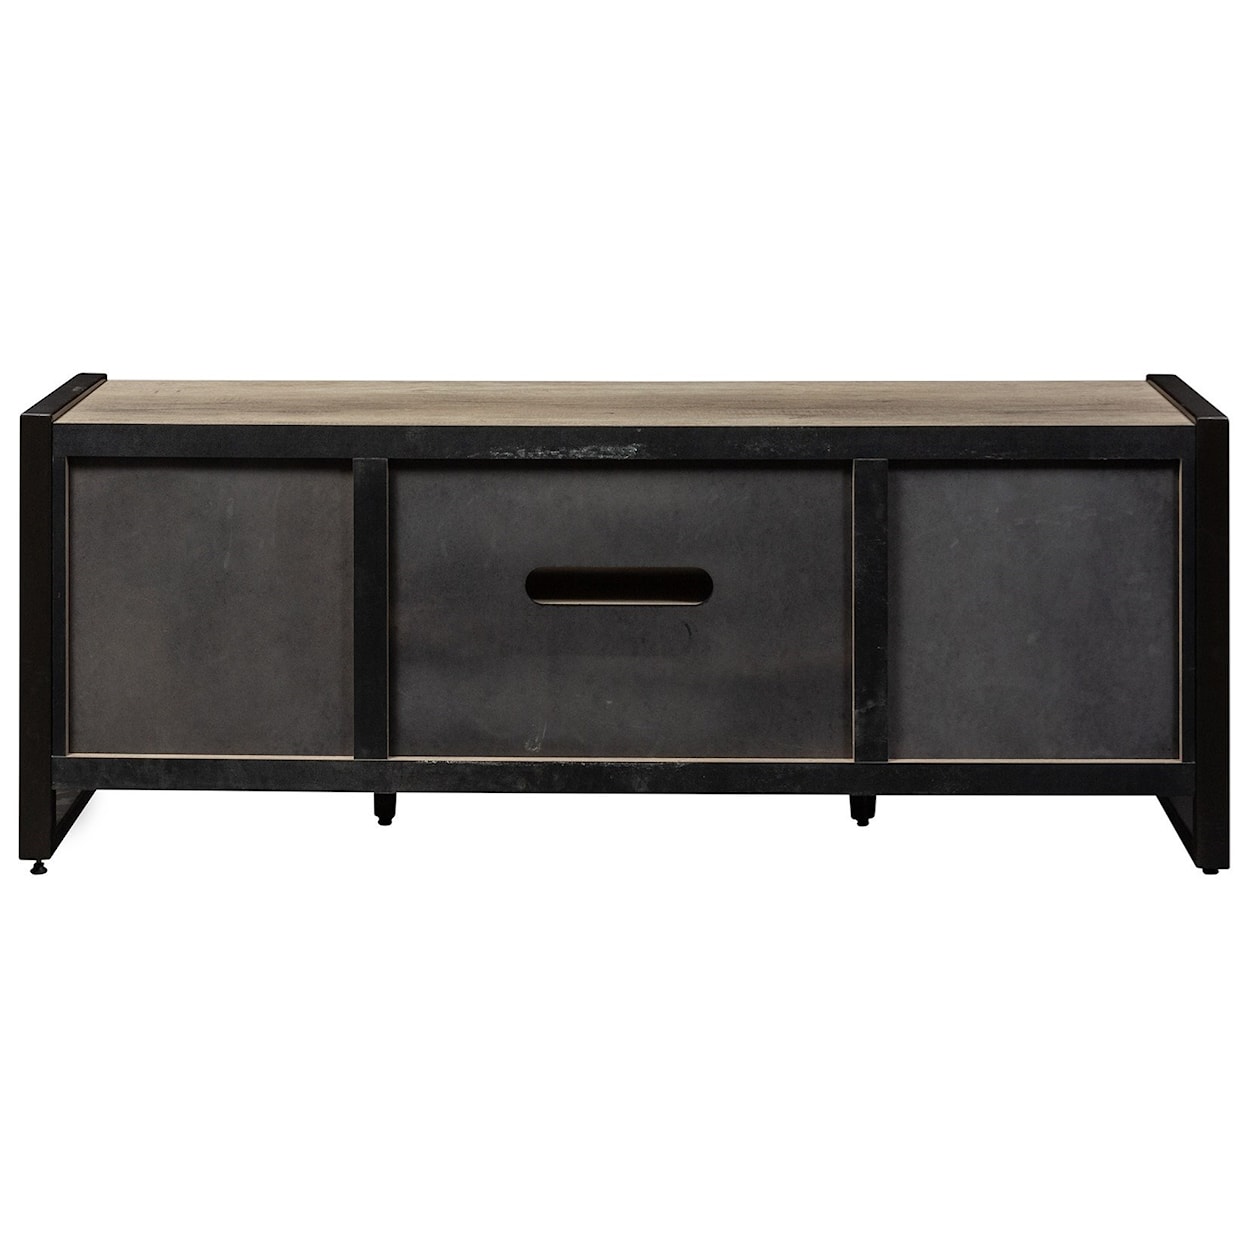 Libby Sun Valley TV Storage Console